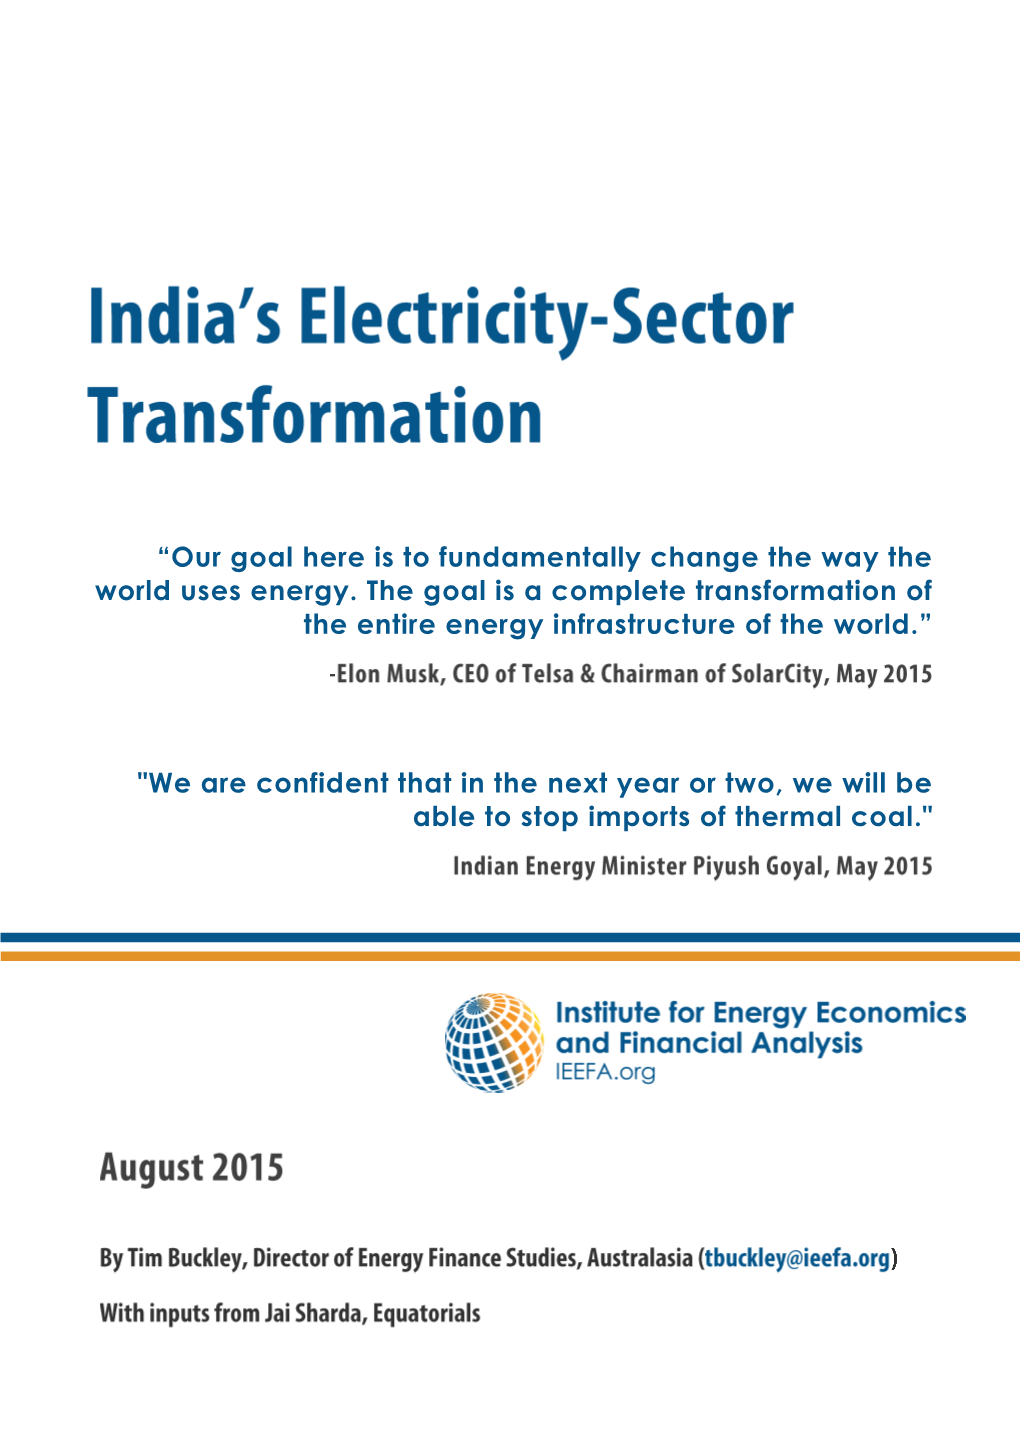 India's Electricity Sector